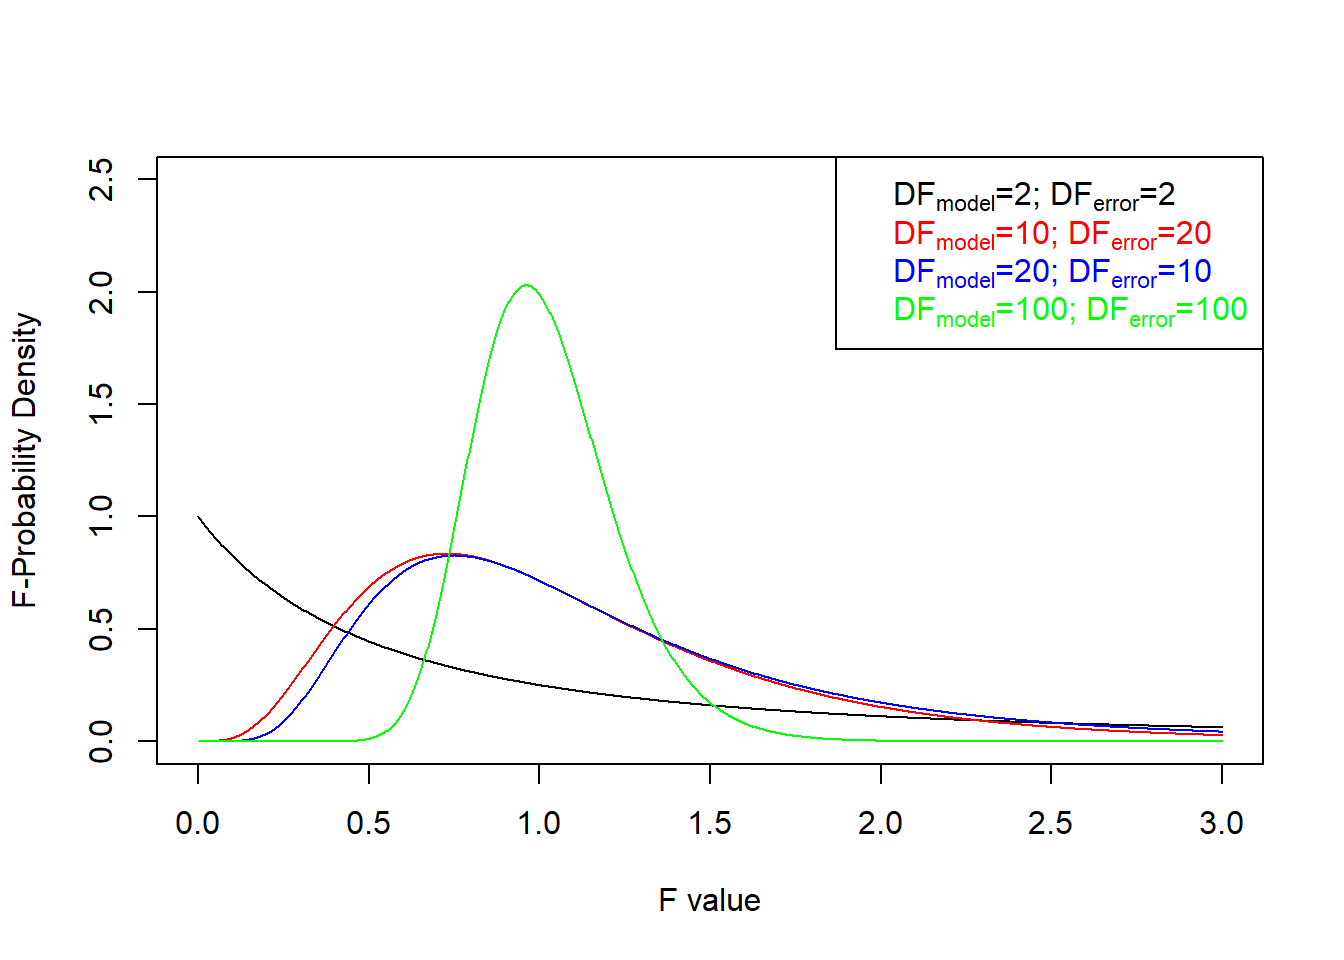 Probability density of the F-distribution for different parameters $DF_{model}, DF_{error}$.